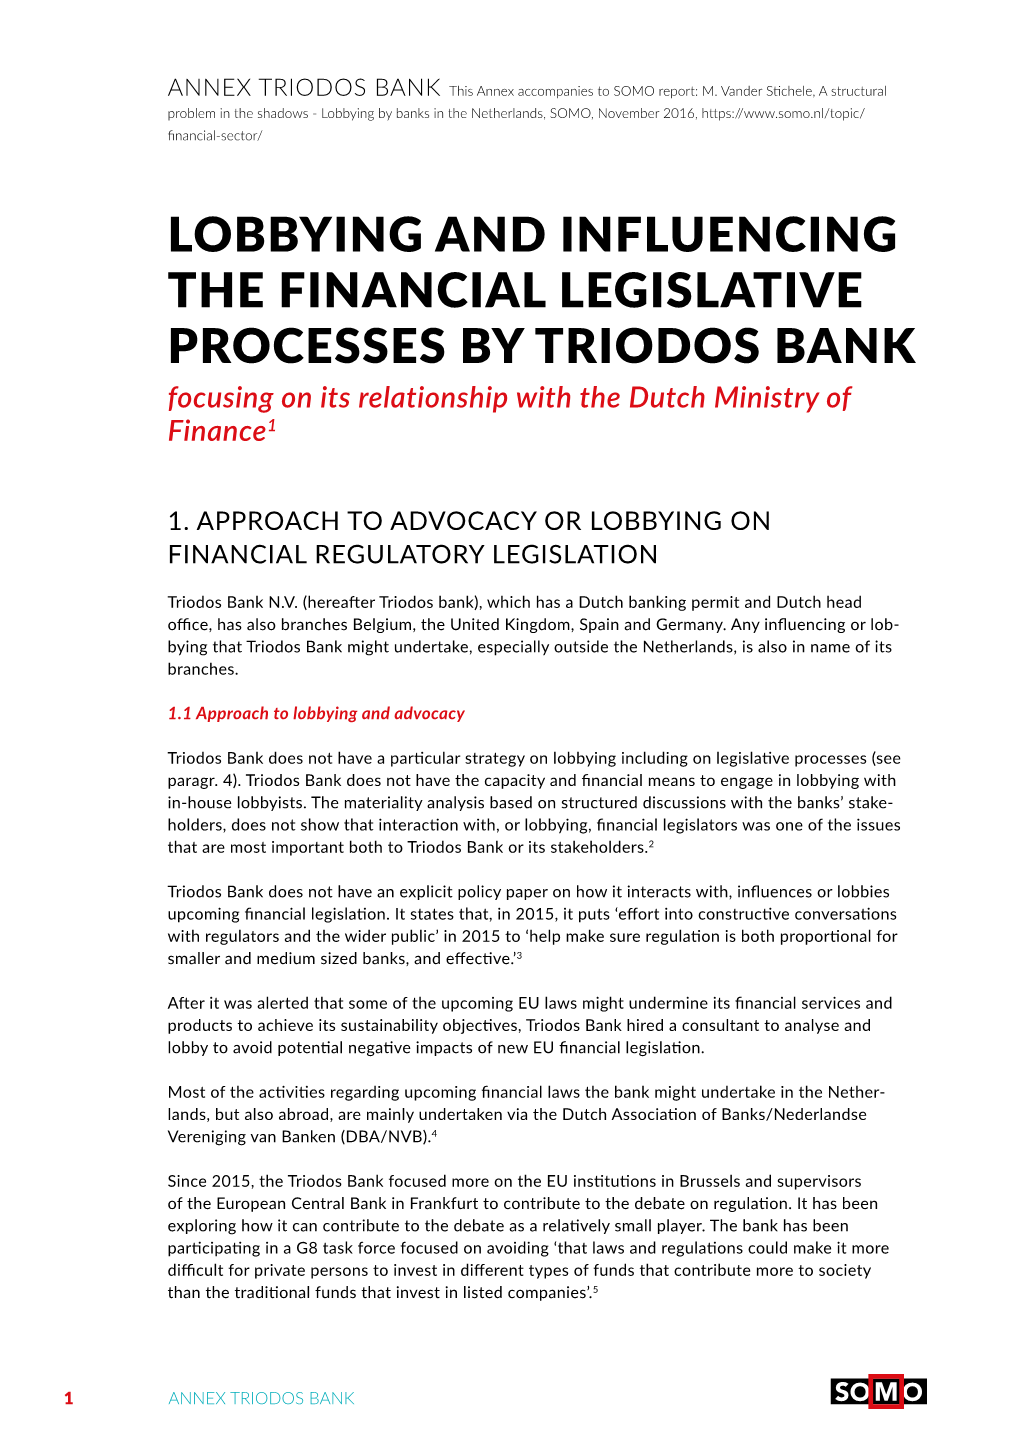 LOBBYING and INFLUENCING the FINANCIAL LEGISLATIVE PROCESSES by TRIODOS BANK Focusing on Its Relationship with the Dutch Ministry of Finance1